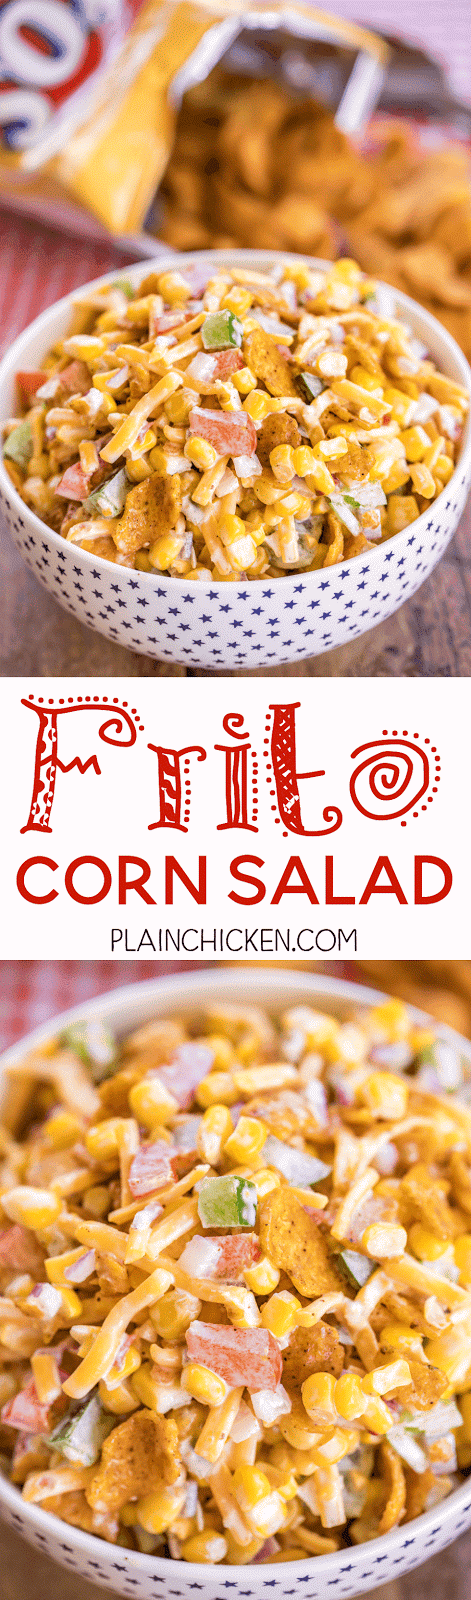 Frito Corn Salad - packed full of great flavor! We could not stop eating it! Corn, bell peppers, onion, cheese tossed in mayonnaise, lime juice, vinegar and Chili Cheese Fritos. Great as a side dish or an appetizer. Can make ahead and refrigerate until ready to serve. Everyone LOVES this easy side dish. I never have any leftovers!